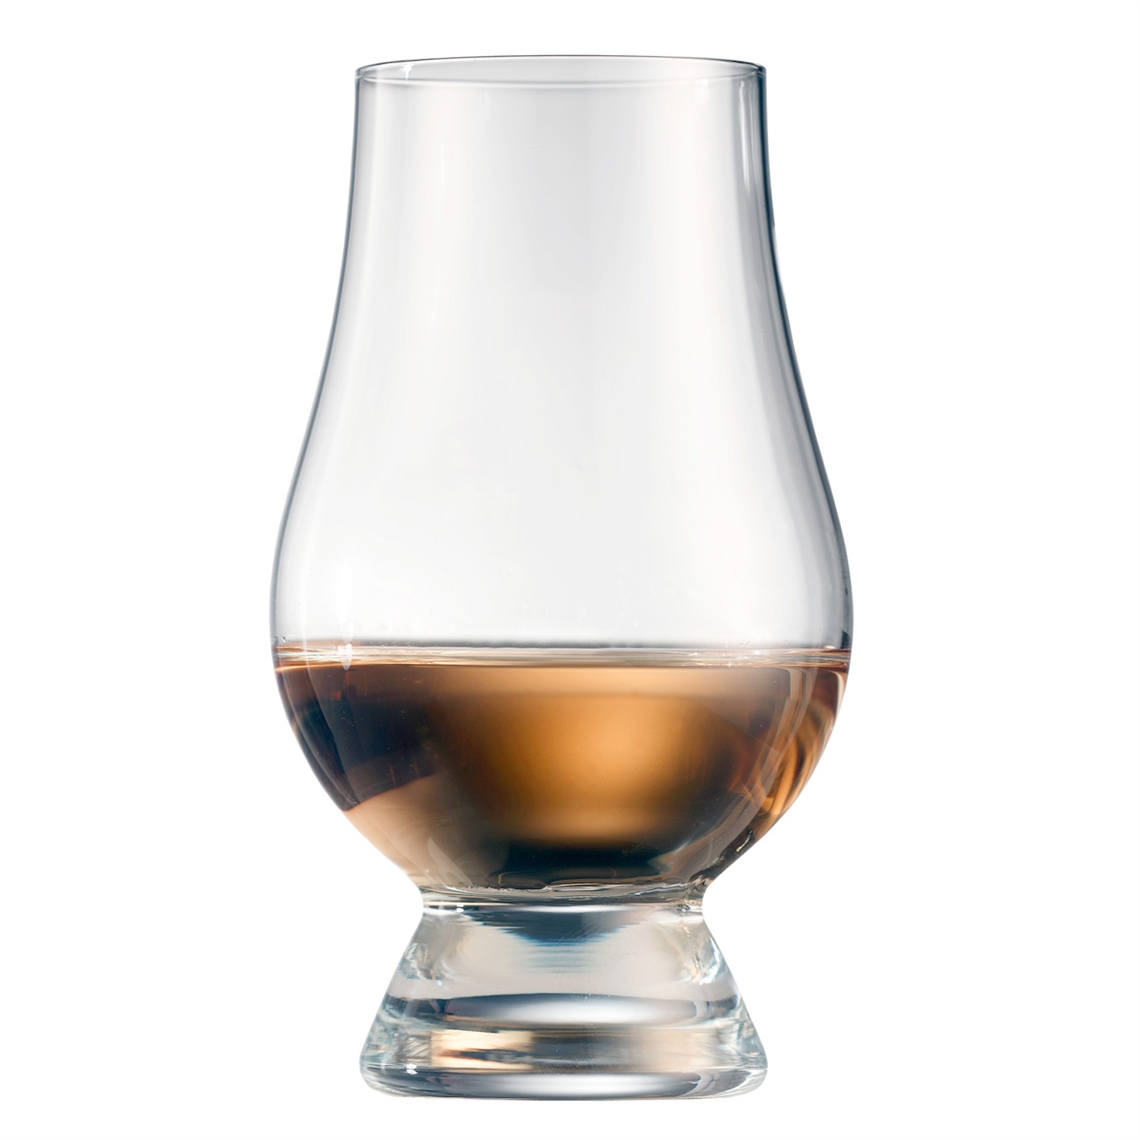 View more glass hire for wine tastings from our Whisky Glasses range